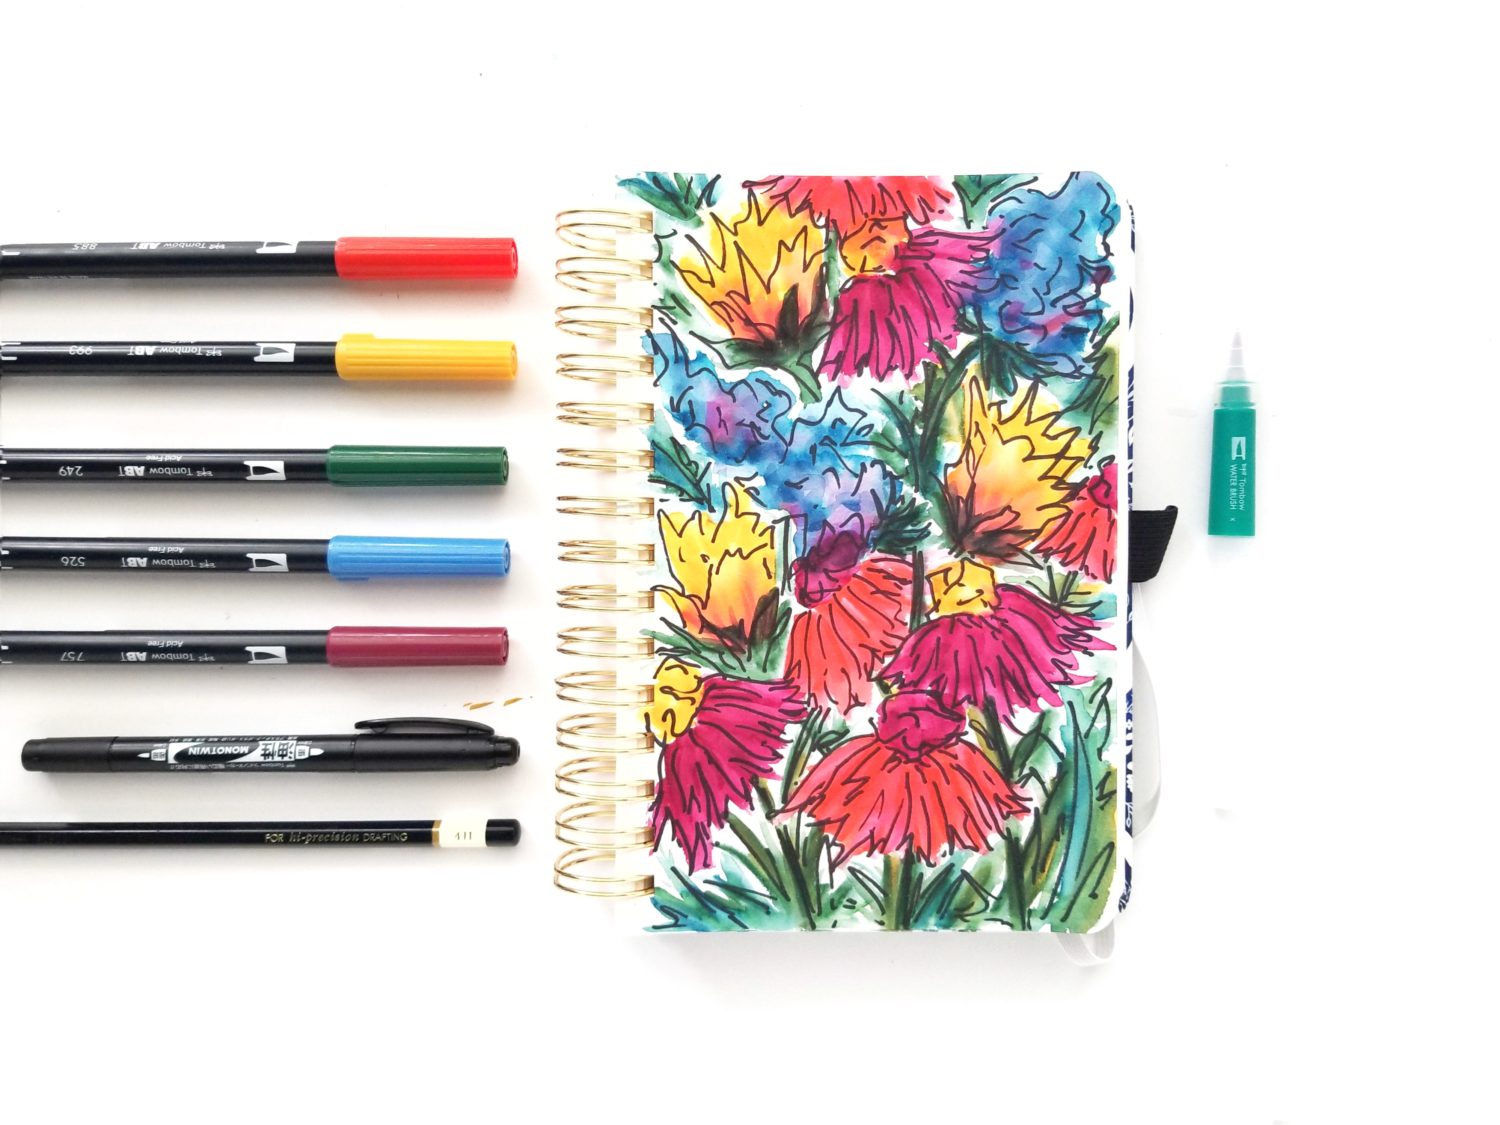 Tombow MONO Drawing Pencil Set Archives - Tombow USA Blog